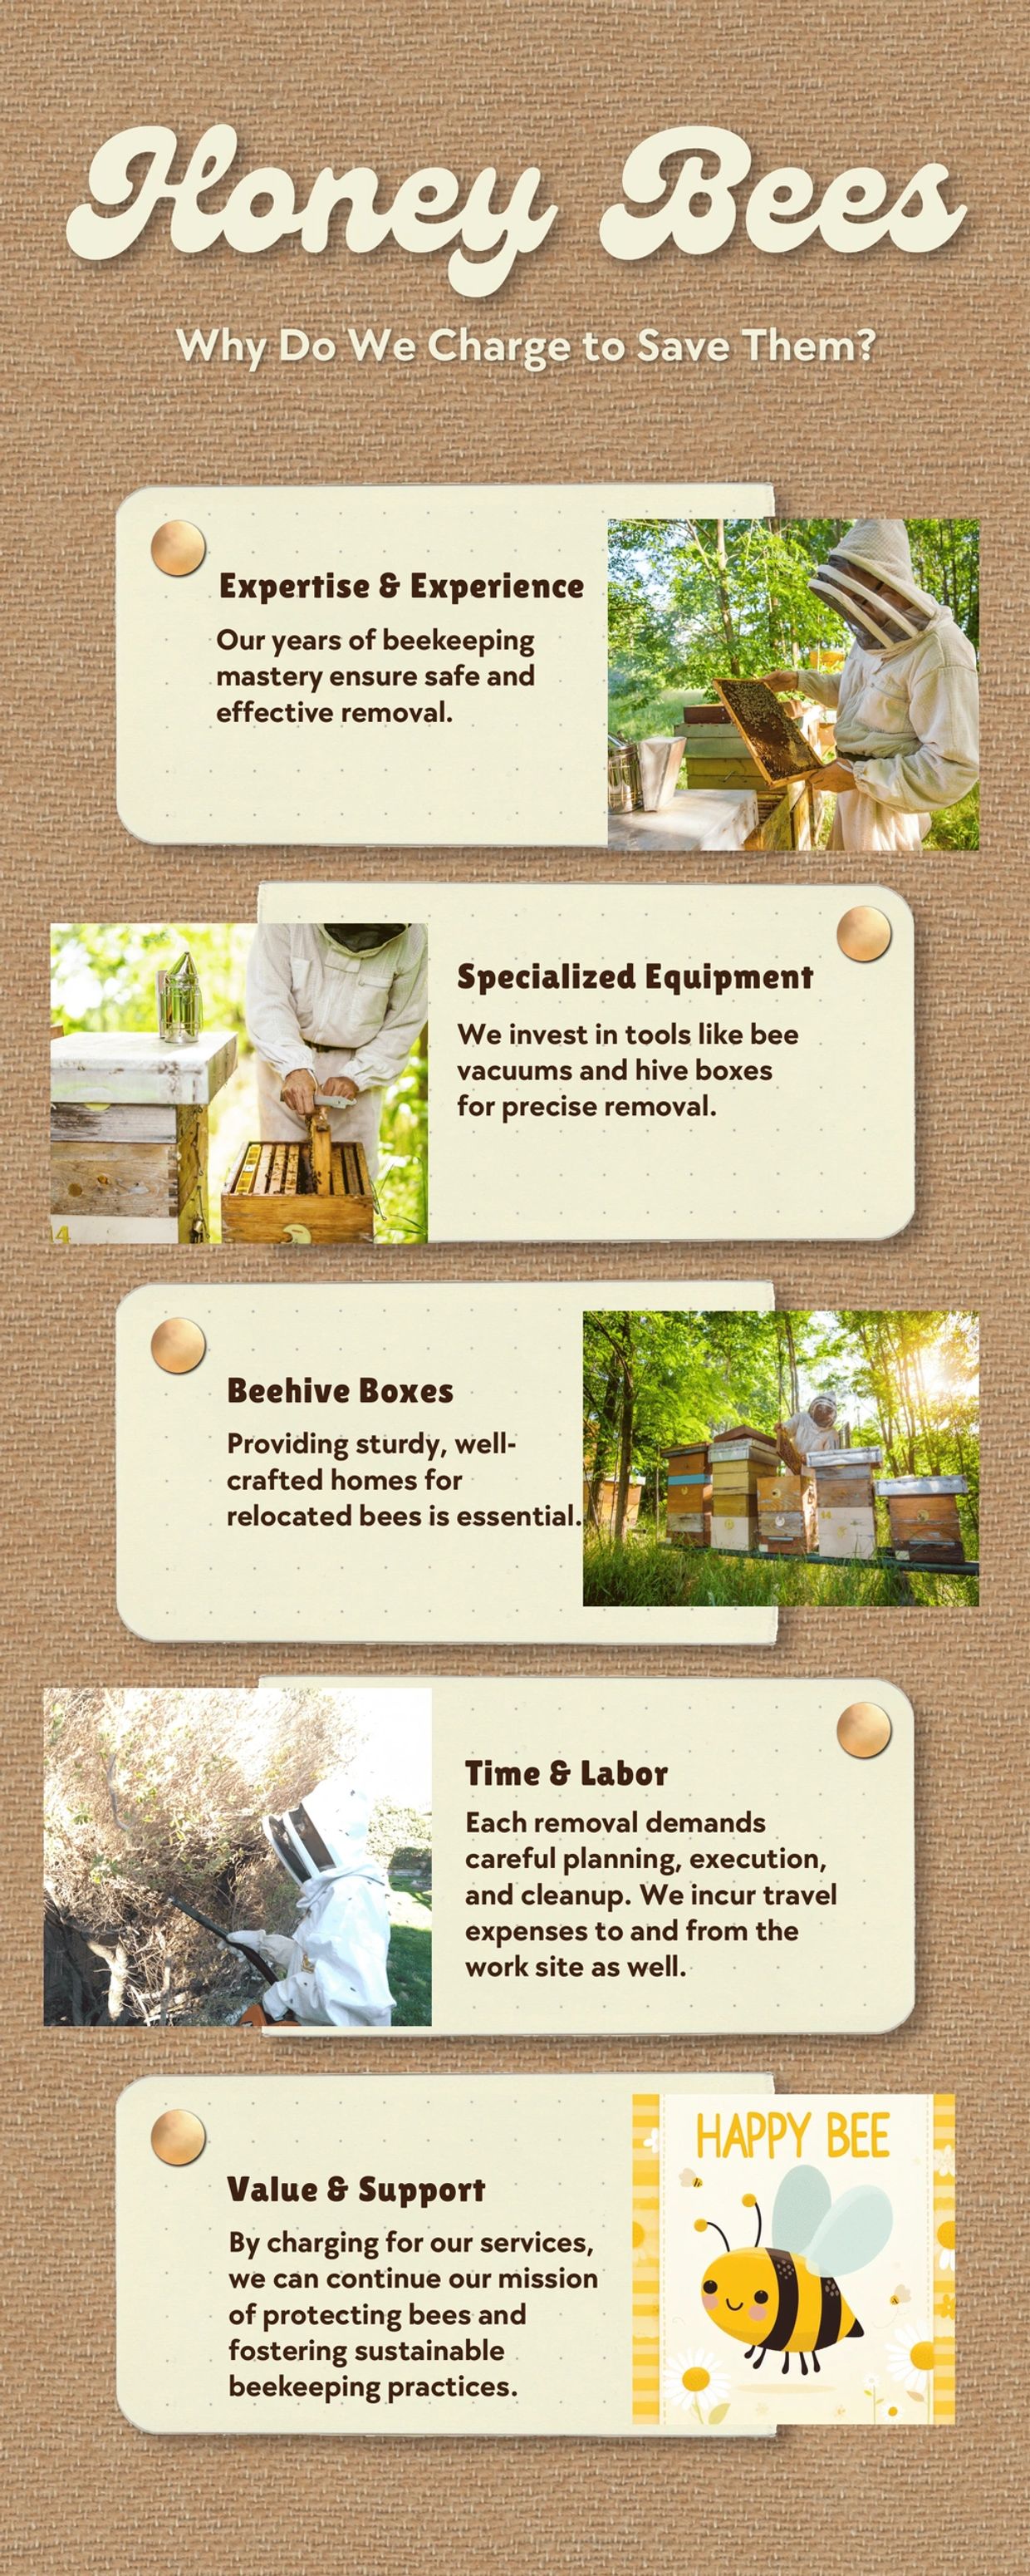 An infographic explaining costs the beekeeper has to pay to remove bees and beehives.